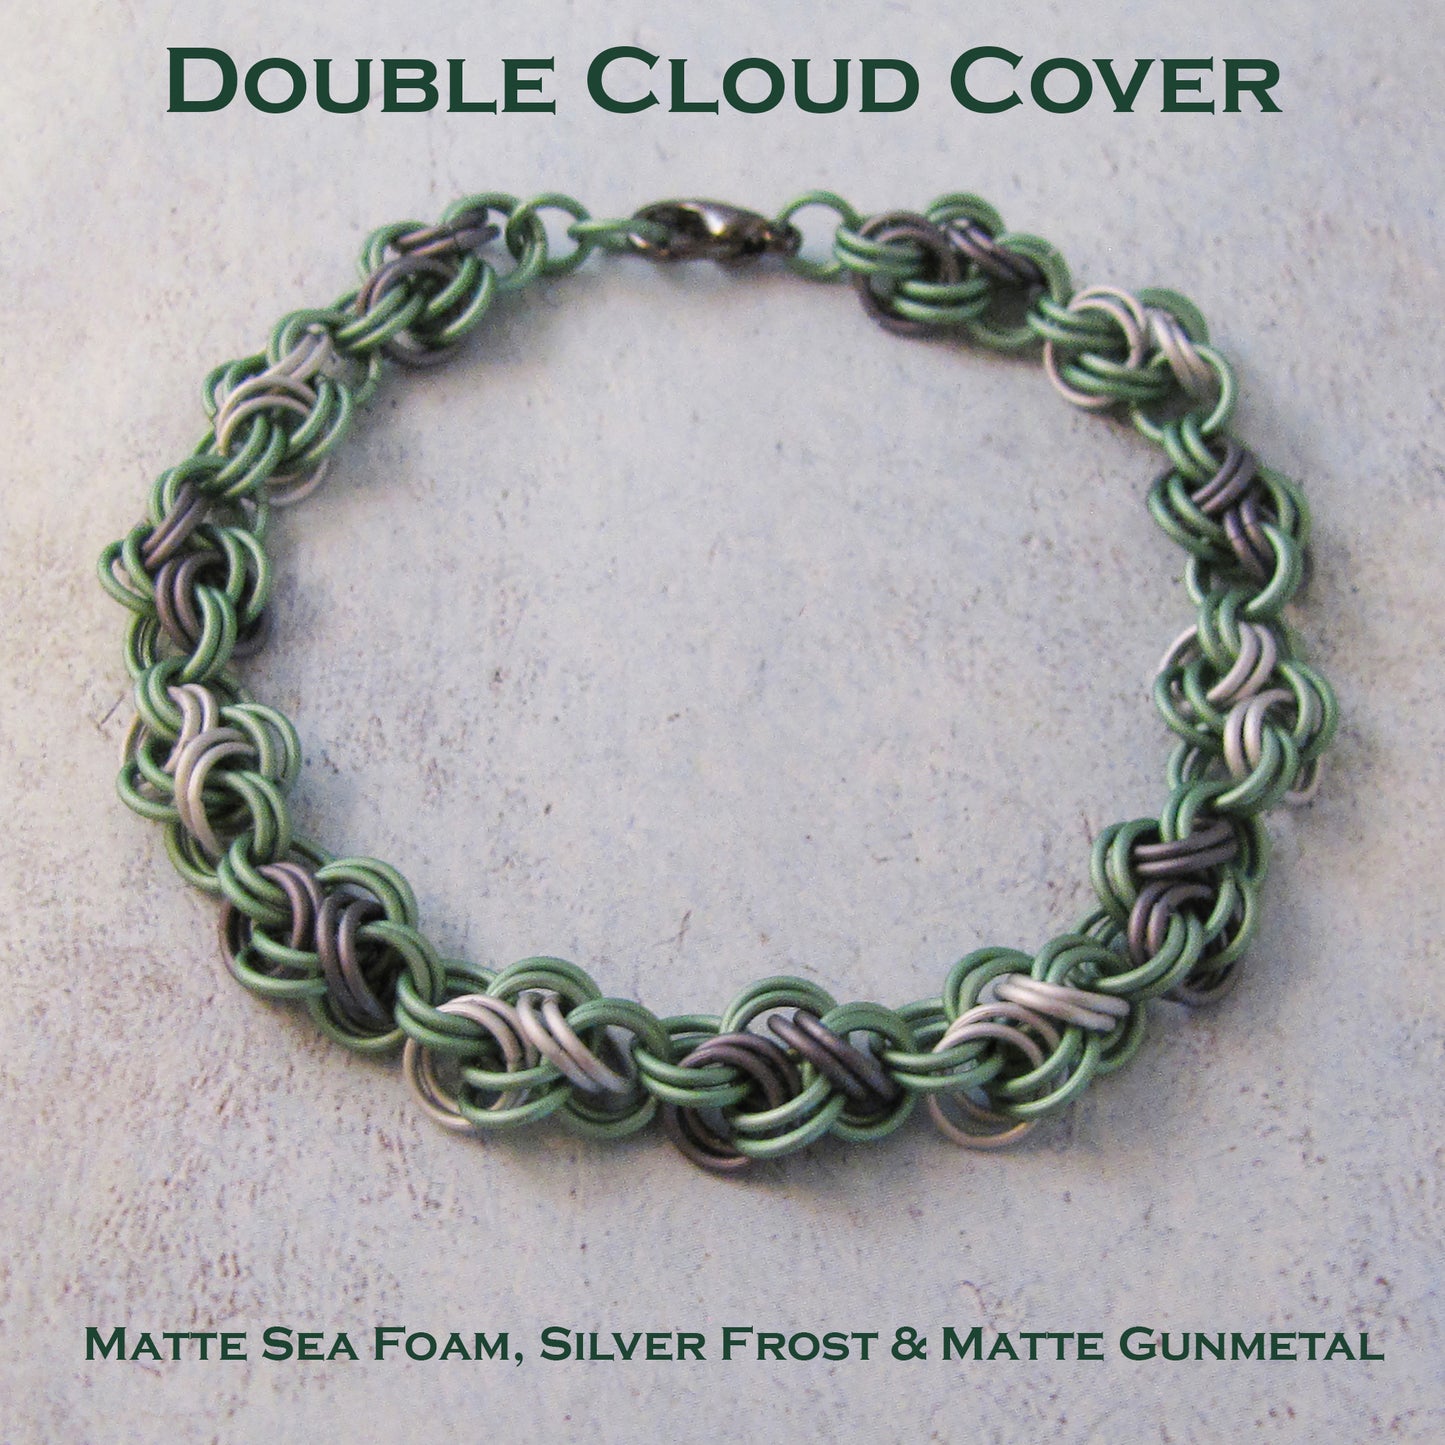 Double Cloud Cover Bracelet Kit with FREE video - Matte Seafoam, Silver Frost and Matte Gunmetal